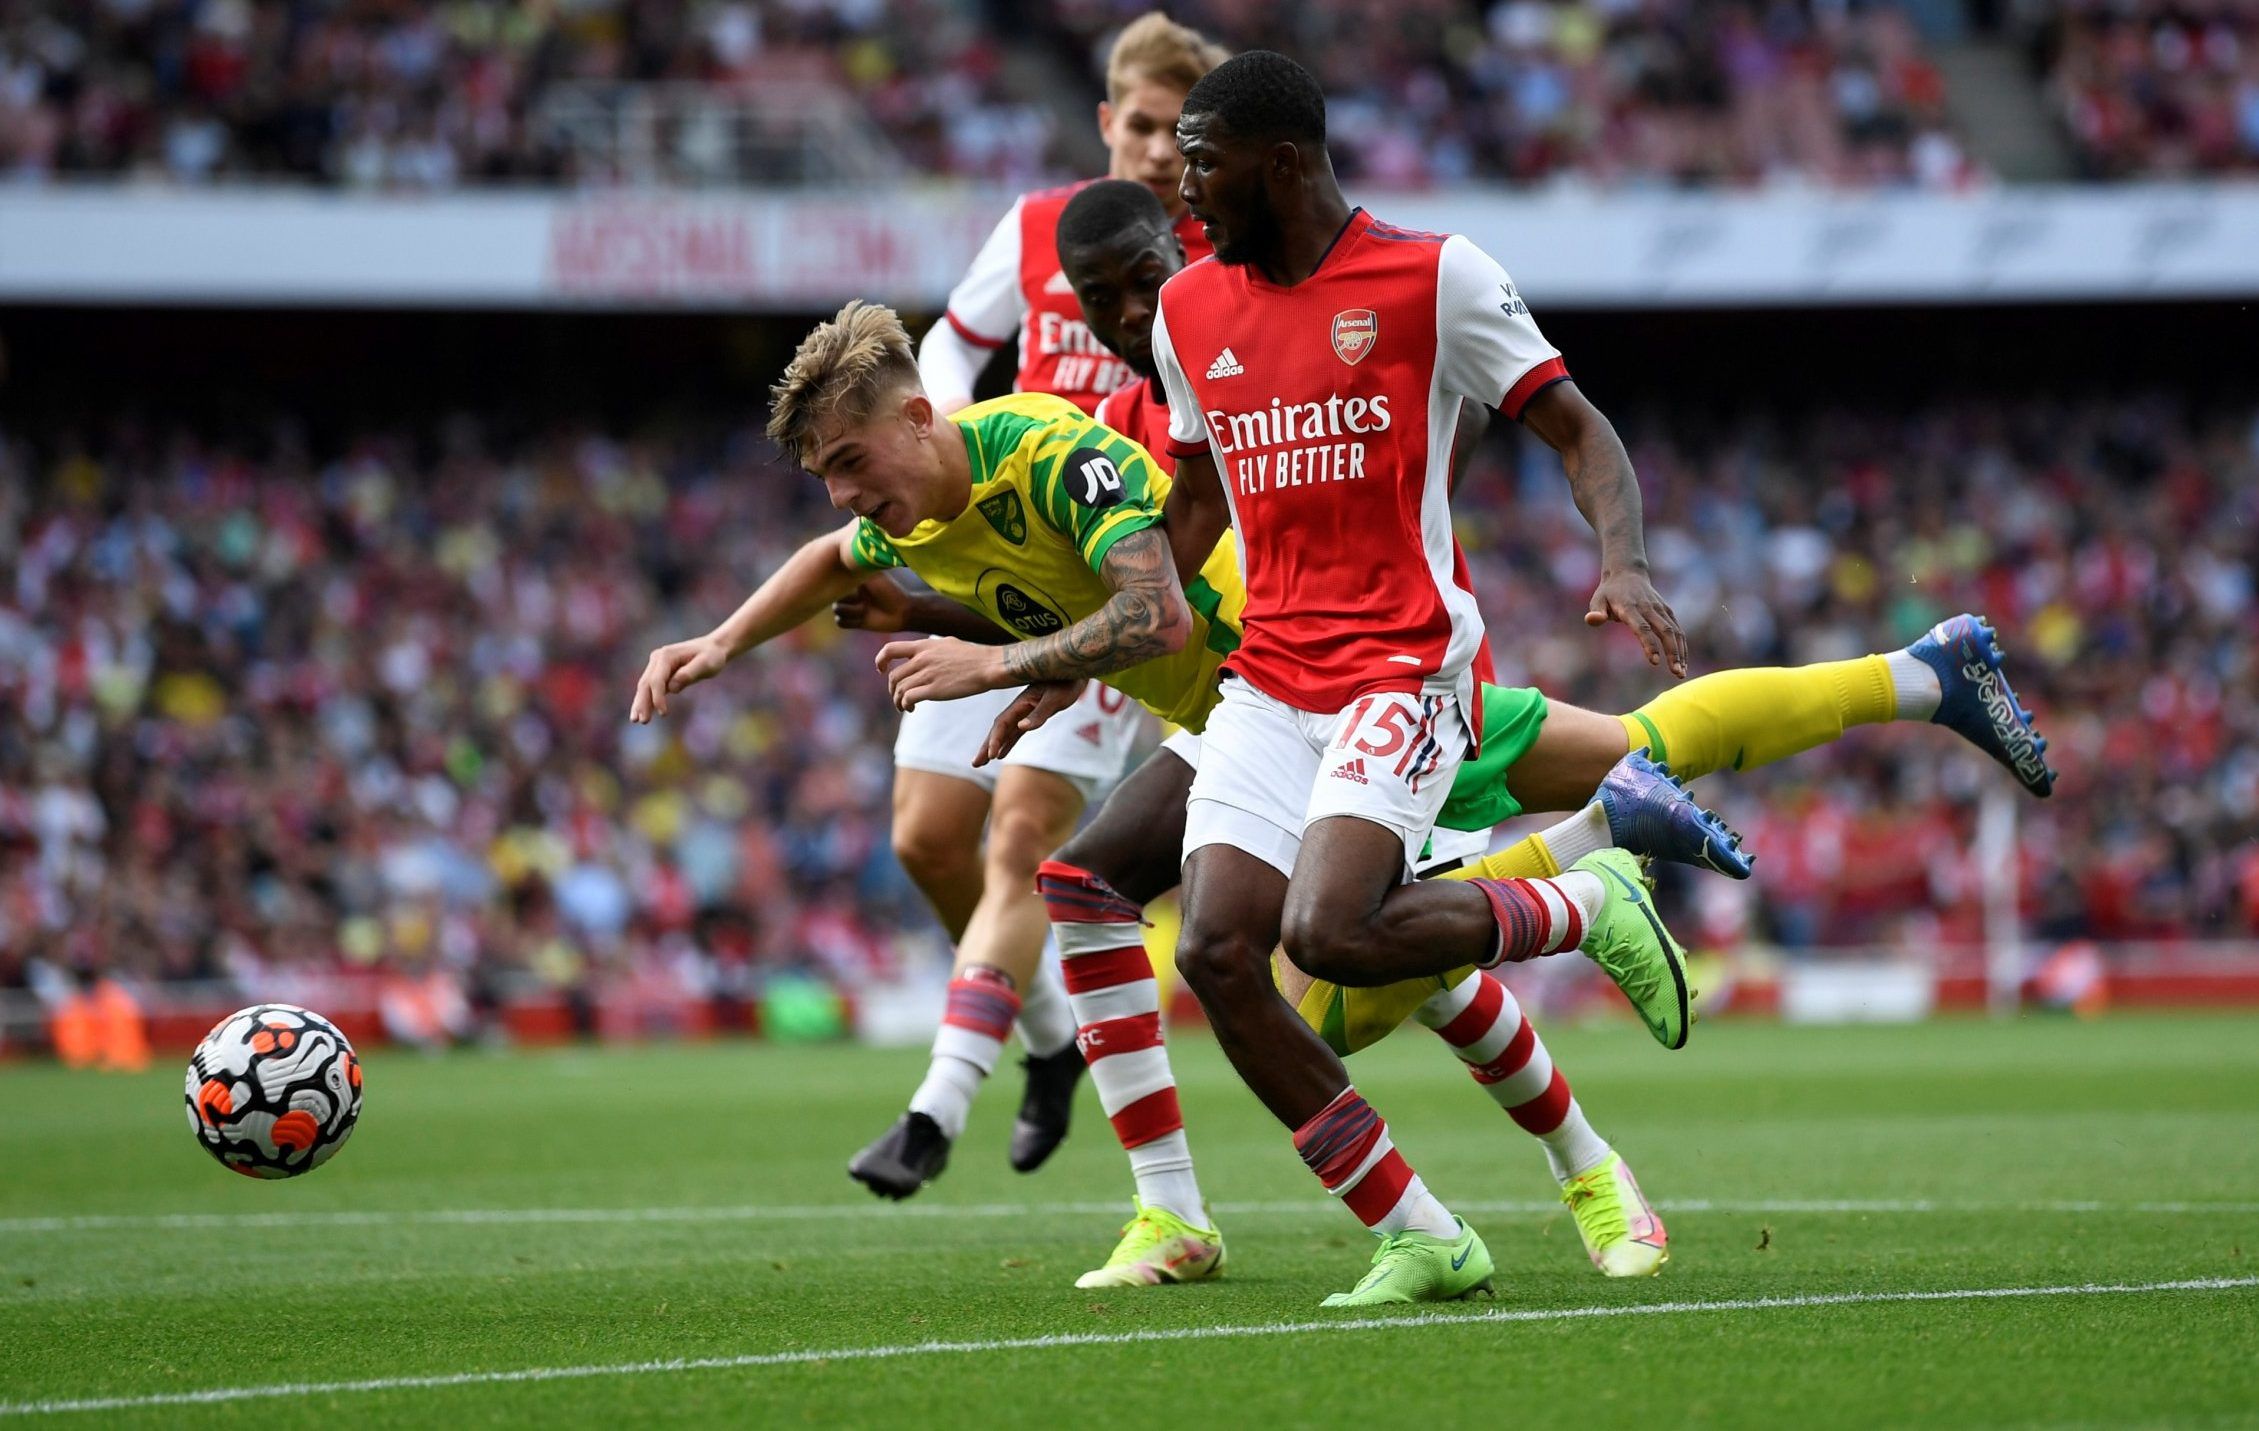 Arsenal midfielder Ainsley Maitland-Niles in action against Norwich City in the Premier League